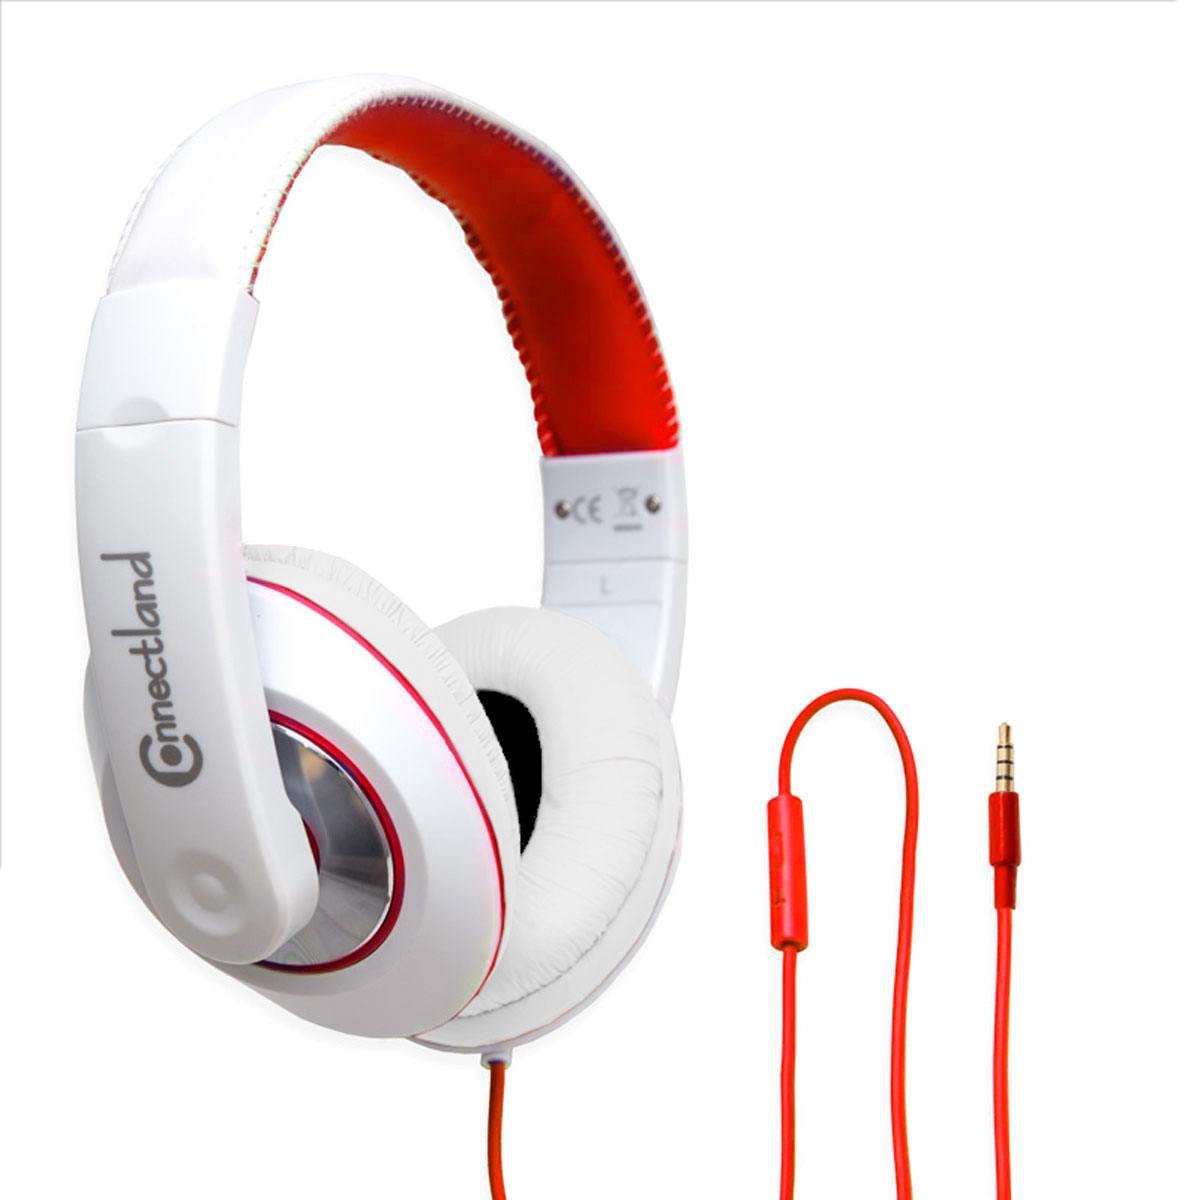 Over The Ear Stereo Kids Mobile Wired Headphone with in-Line Microphone Headphone White Red - image 1 of 3